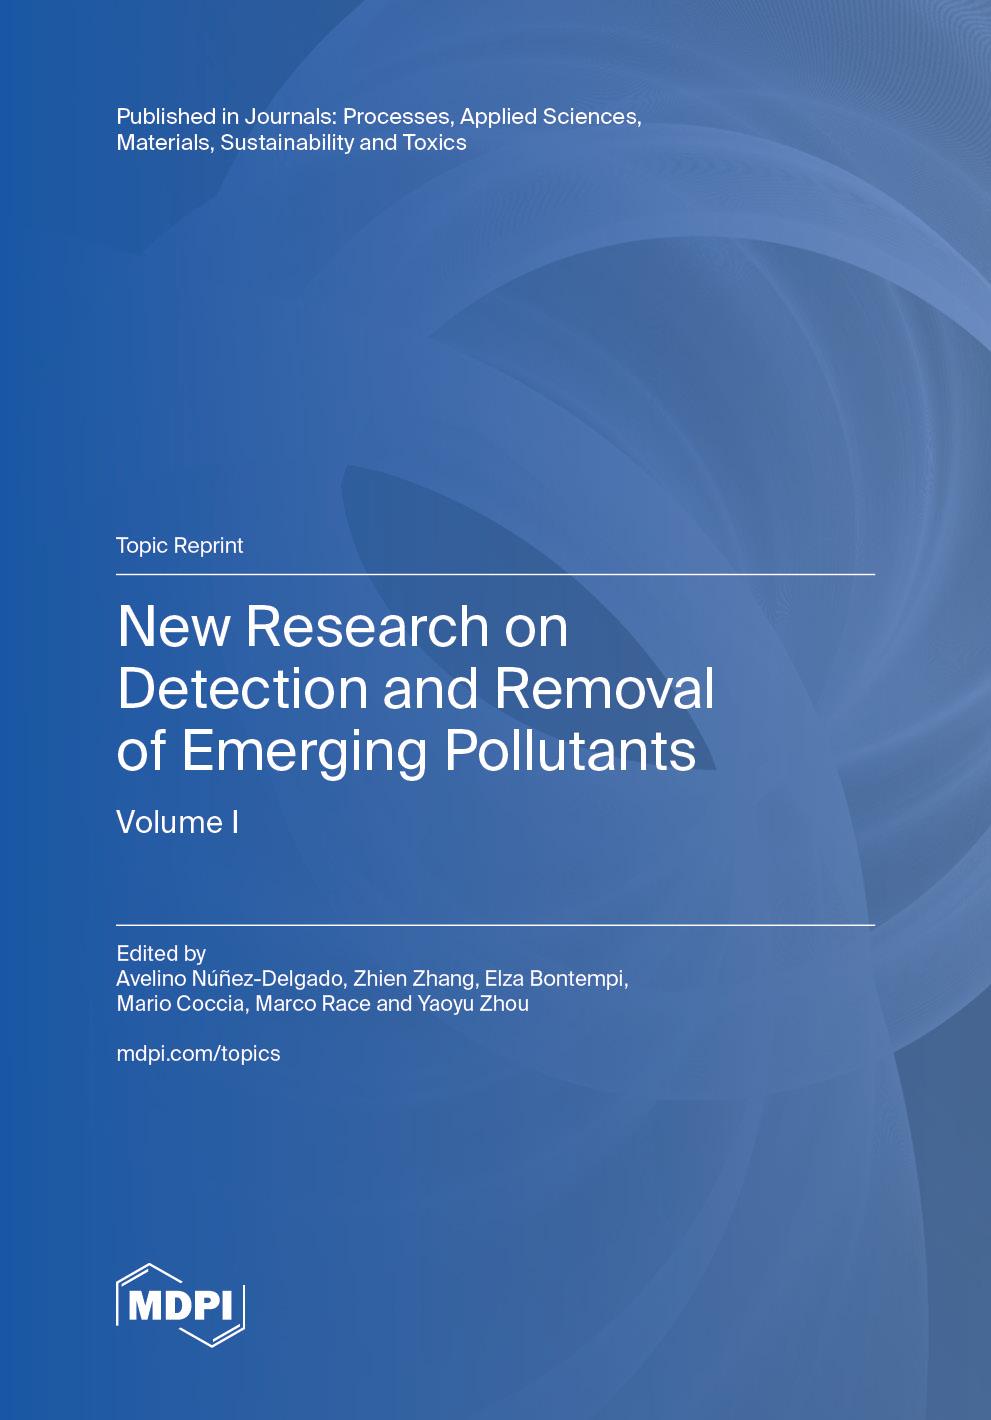 New Research on Detection and Removal of Emerging Pollutants